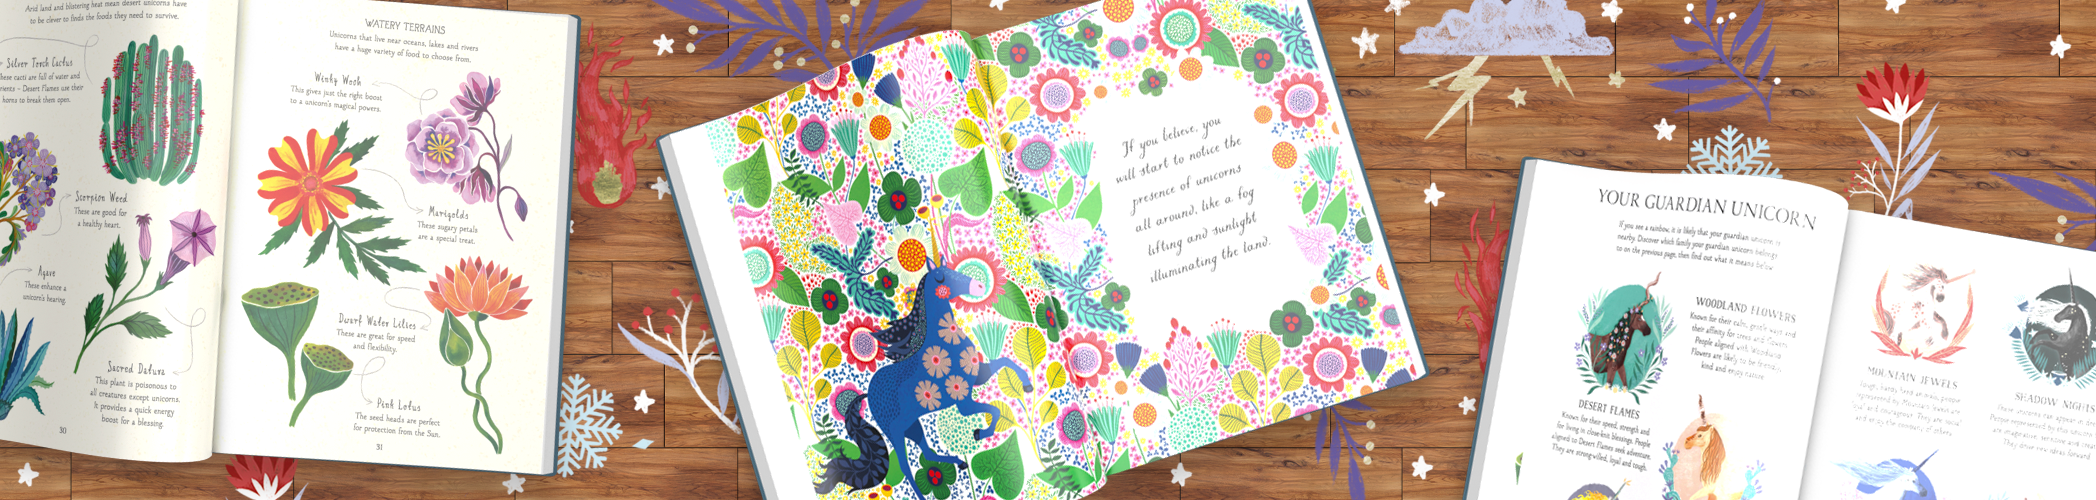 Page Spreads for the magical unicorn society